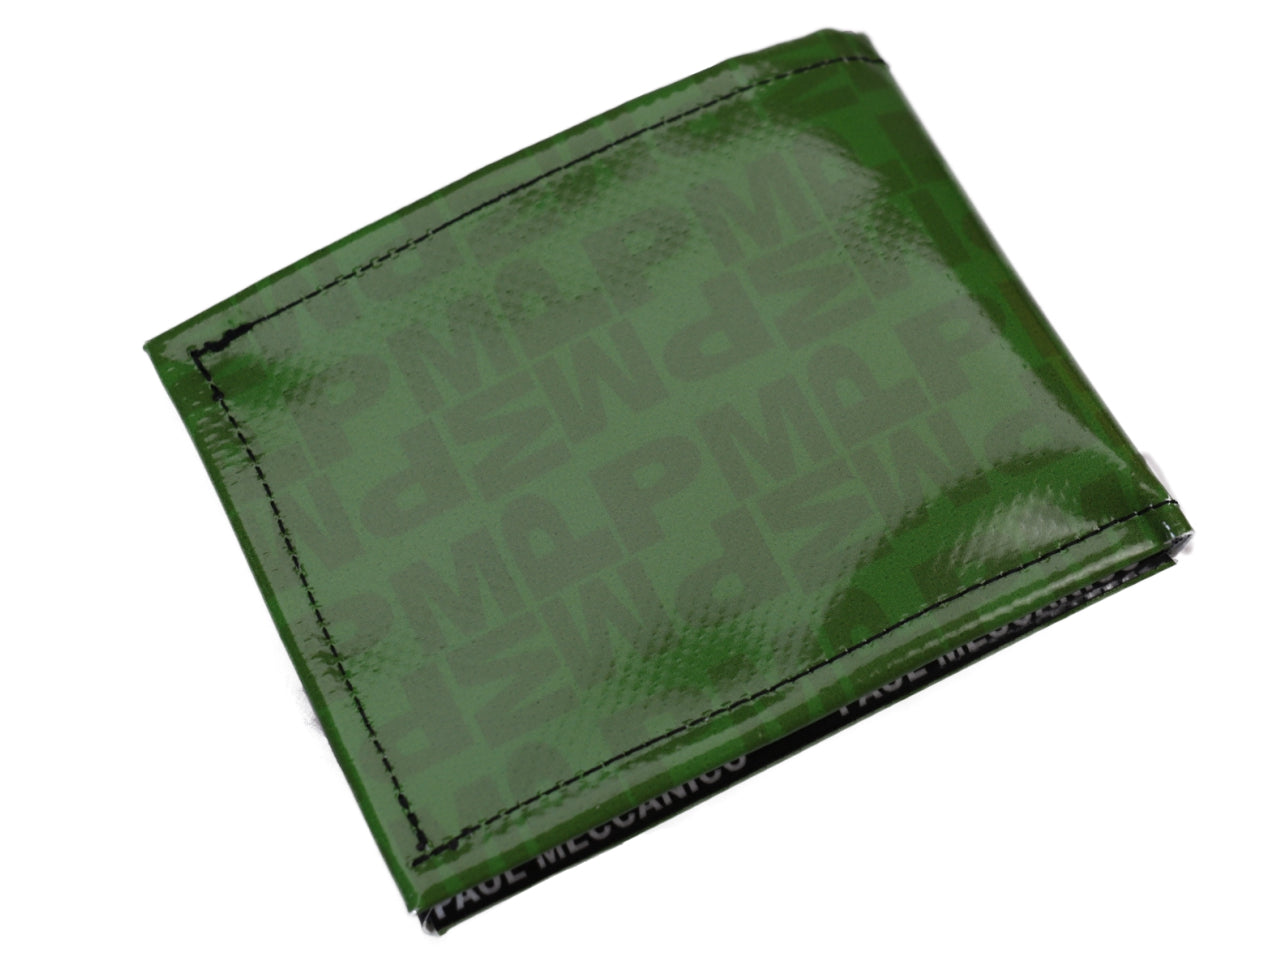 MEN'S WALLET GREEN WITH LETTERING FANTASY. MODEL CRIK MADE OF LORRY TARPAULIN. - Limited Edition Paul Meccanico